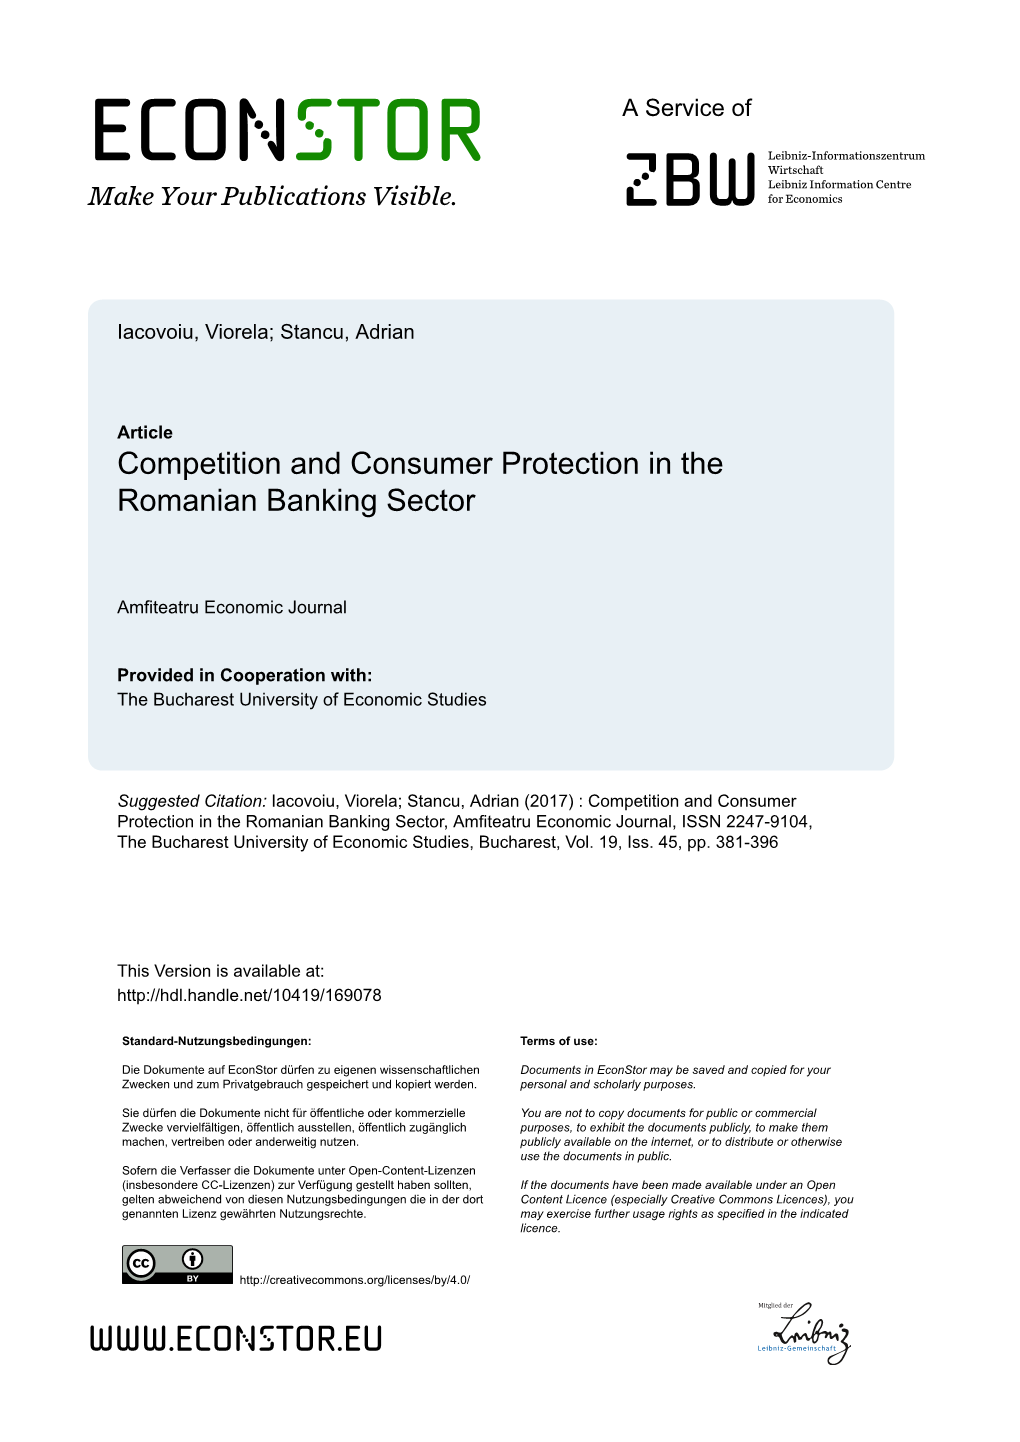 Competition and Consumer Protection in the Romanian Banking Sector